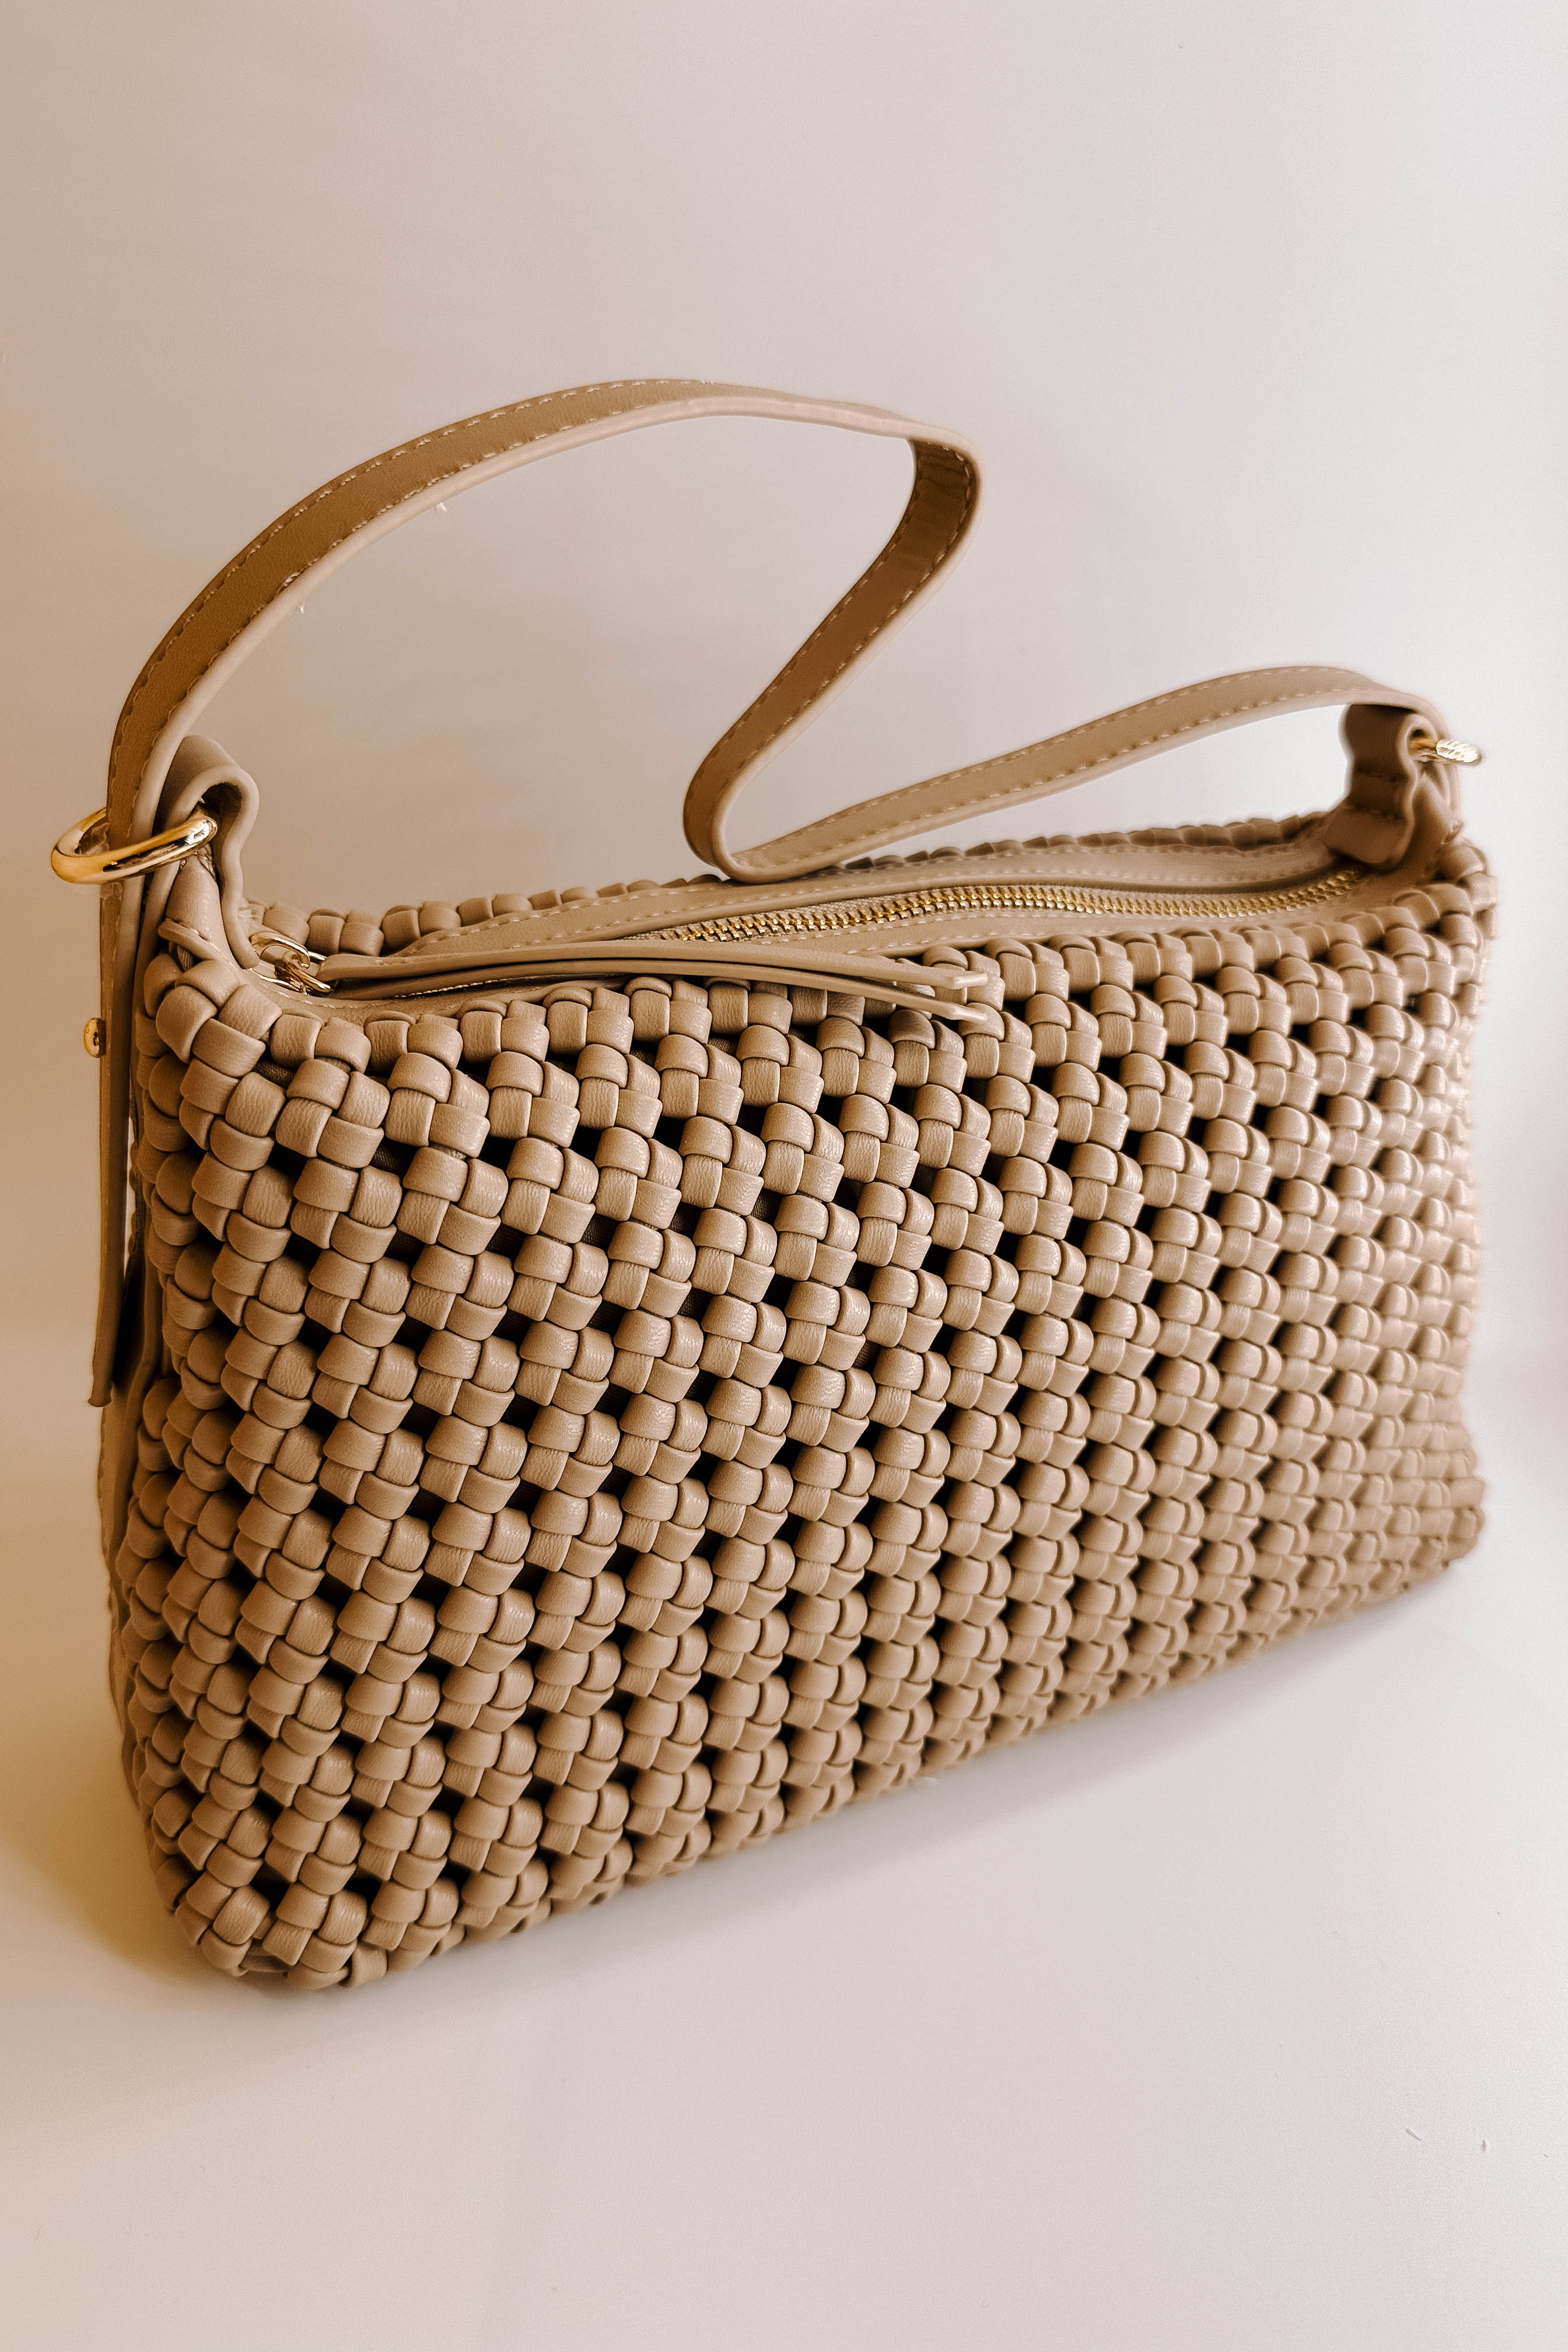 Front view of the Naya Beige Woven Purse against a white background.  It has dark beige faux-leather material with a woven design, short and long removable straps, gold hardware, and a patterned interior with a zippered pocket and a slit pocket.